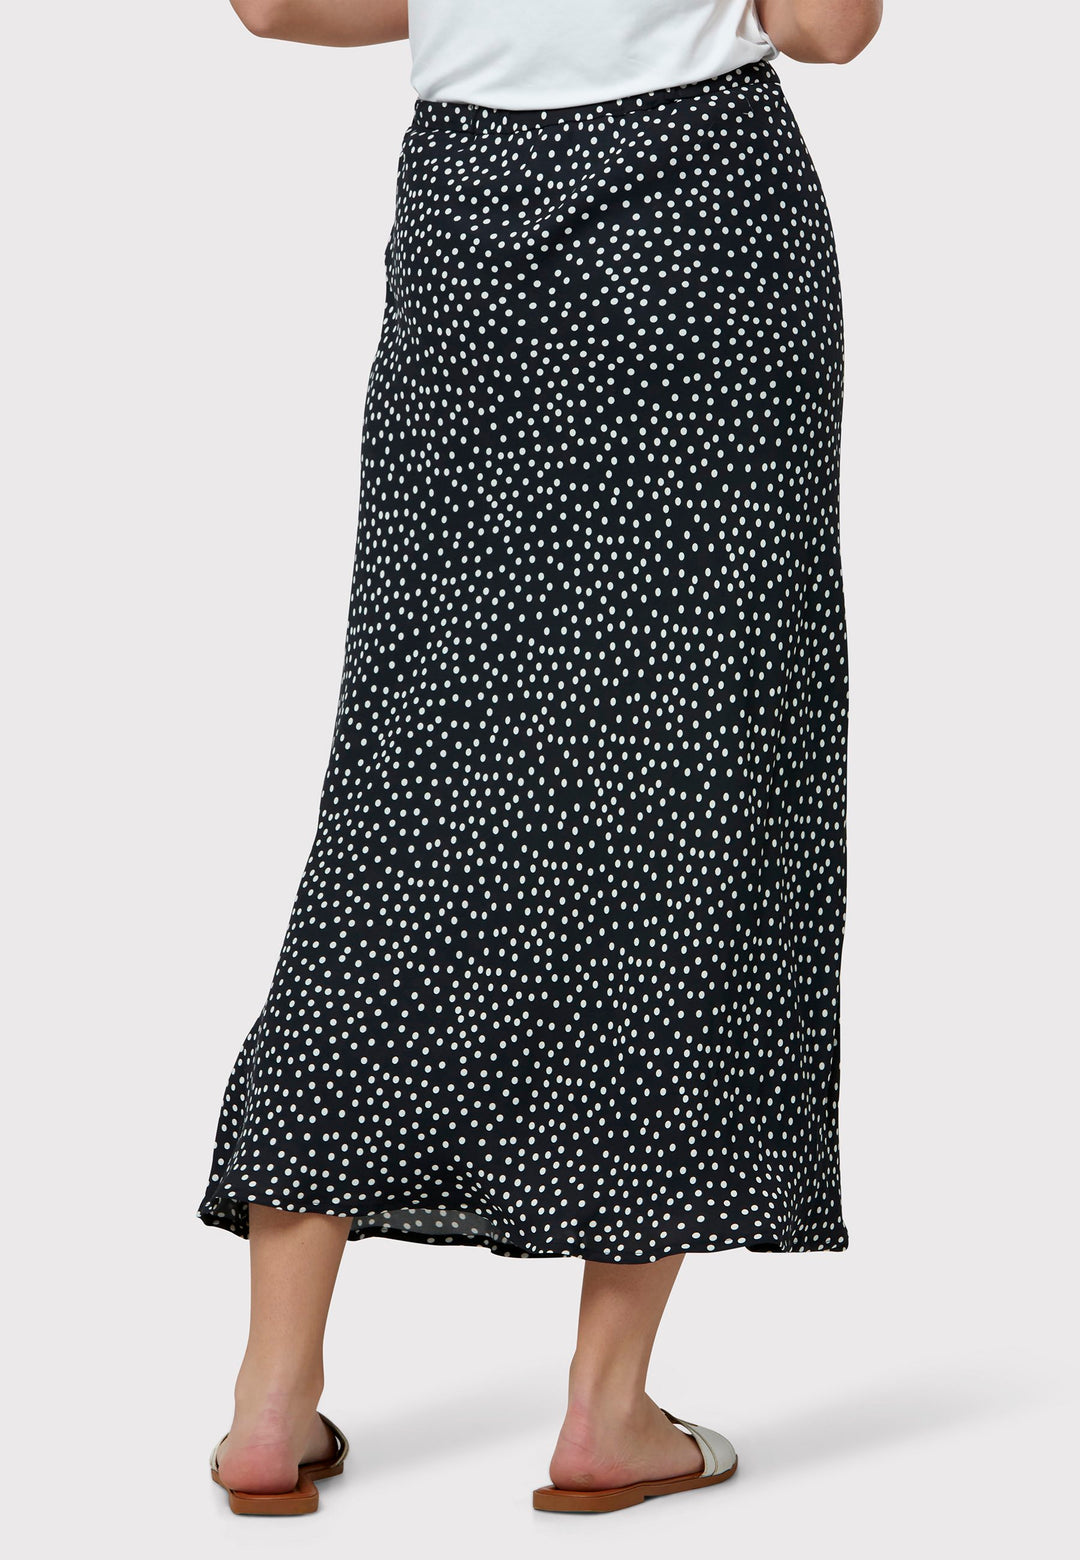 Experience the charm of the Peyton Navy and White Polka Dot Skirt, beautifully crafted with a graceful bias cut for an elegant drape. This mid-calf length design features a flattering high-waisted silhouette in classic navy and white polka dot viscose crepe fabric, echoing 30's glamour.